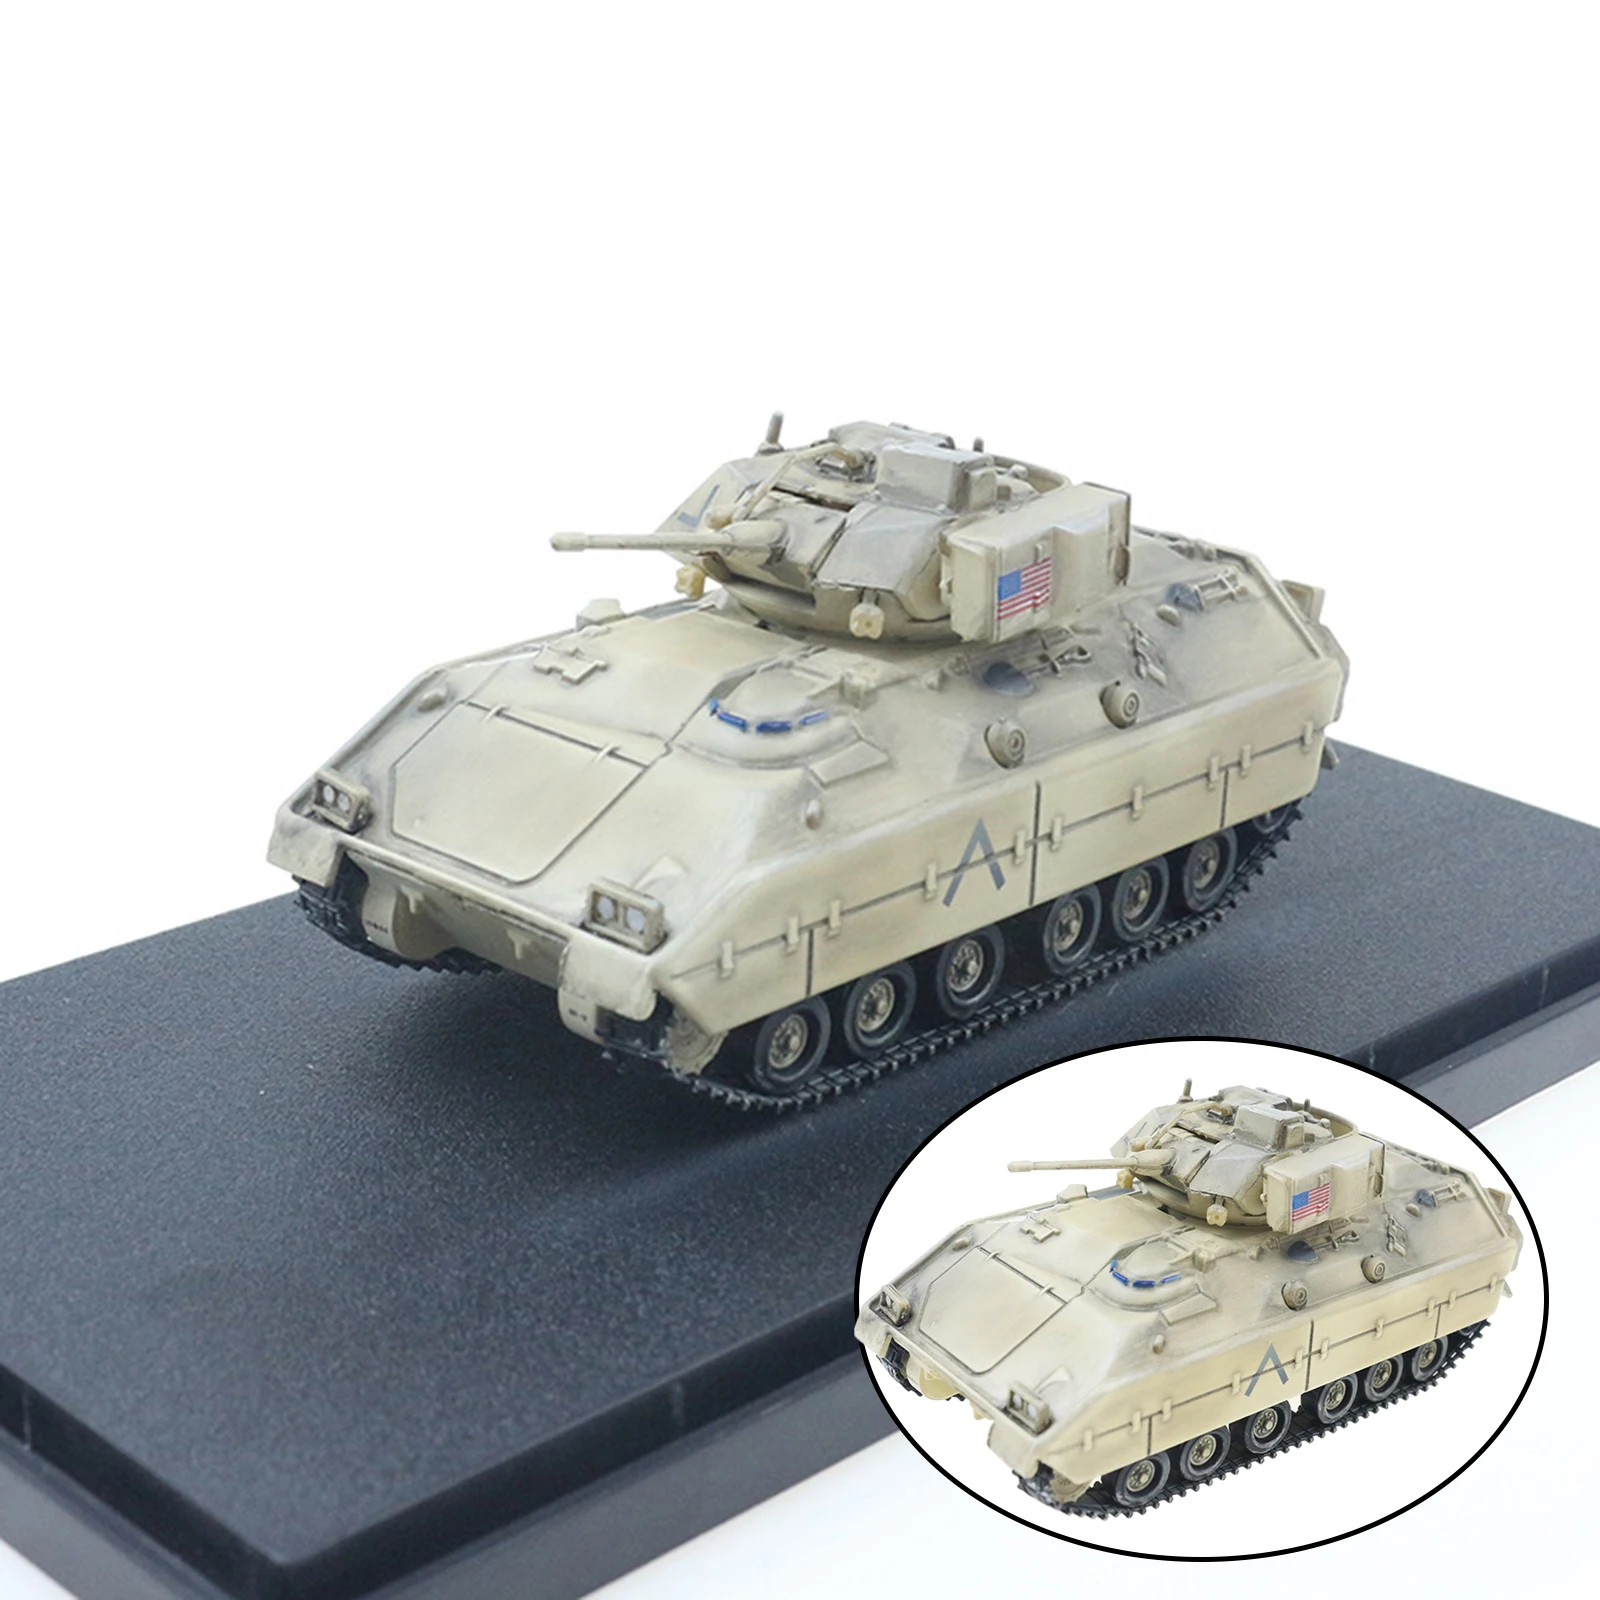 

1/72 Scale Metal 12107B M2 IFV Diecast Tank Model Vehicles Alloy Collection Gifts for Boys Toys Decorations